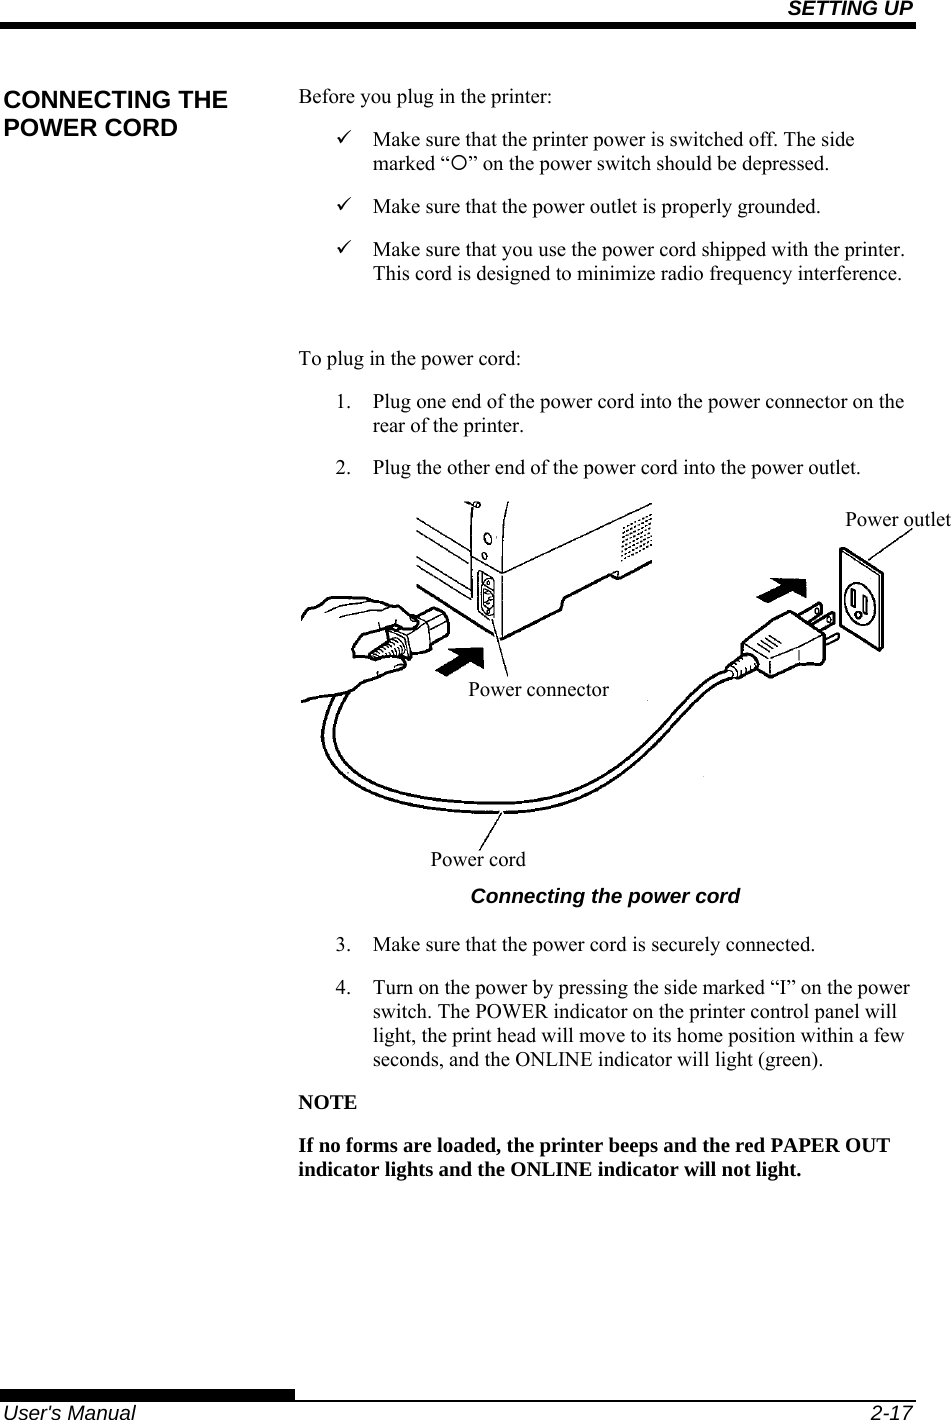 SETTING UP   User&apos;s Manual  2-17 Before you plug in the printer: 9  Make sure that the printer power is switched off. The side marked “{” on the power switch should be depressed. 9  Make sure that the power outlet is properly grounded. 9  Make sure that you use the power cord shipped with the printer. This cord is designed to minimize radio frequency interference.  To plug in the power cord: 1.  Plug one end of the power cord into the power connector on the rear of the printer. 2.  Plug the other end of the power cord into the power outlet.  Connecting the power cord 3.  Make sure that the power cord is securely connected. 4.  Turn on the power by pressing the side marked “I” on the power switch. The POWER indicator on the printer control panel will light, the print head will move to its home position within a few seconds, and the ONLINE indicator will light (green). NOTE If no forms are loaded, the printer beeps and the red PAPER OUT indicator lights and the ONLINE indicator will not light.  CONNECTING THE POWER CORD Power connector Power cord Power outlet 